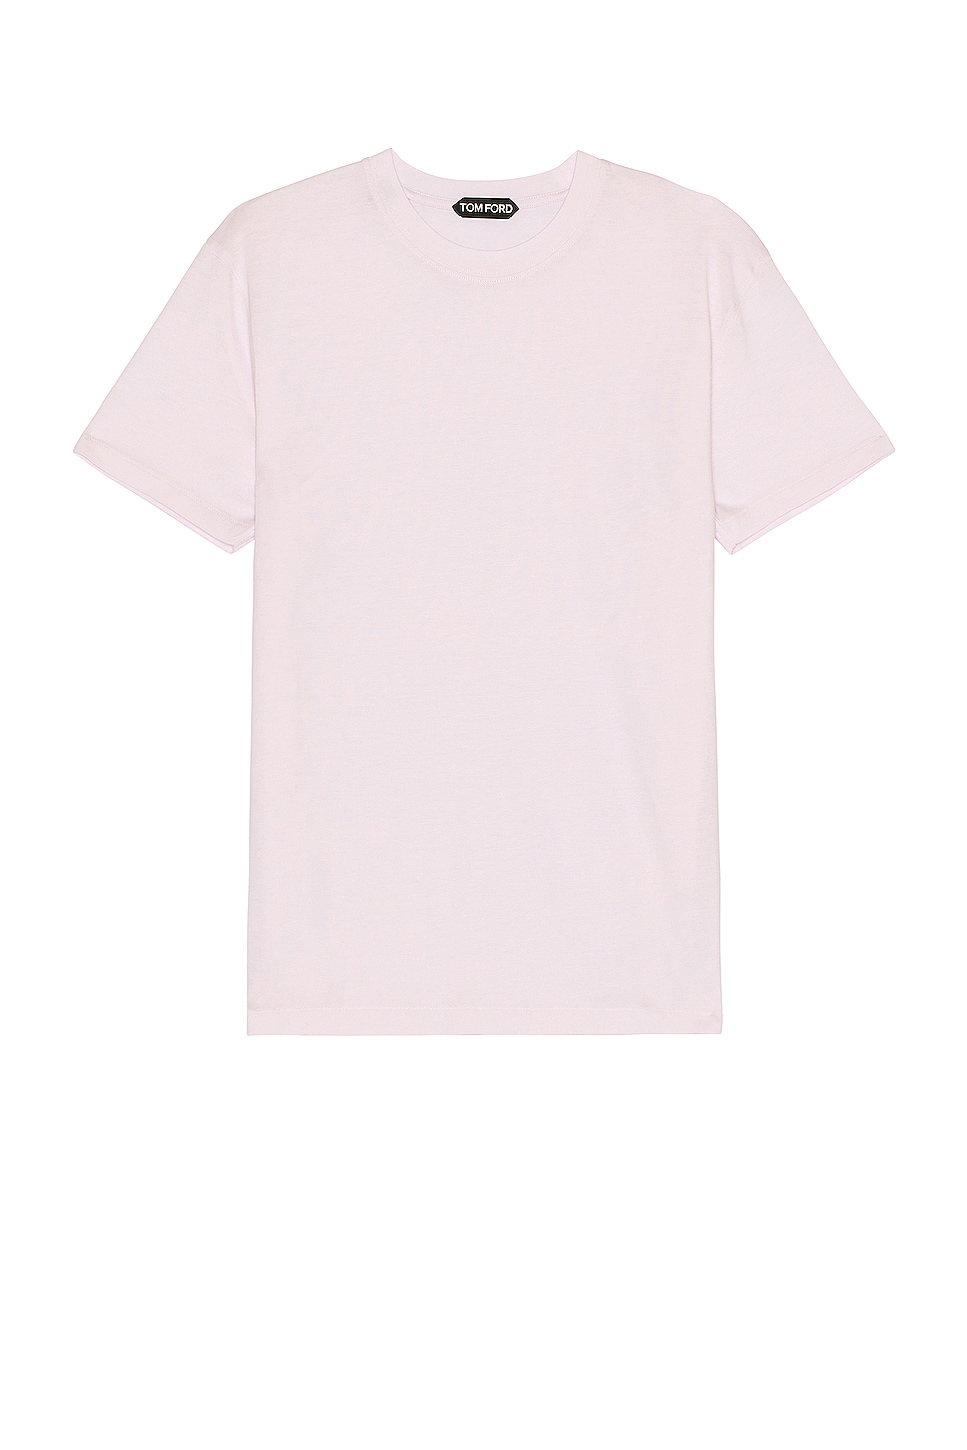 Image 1 of TOM FORD Lyocell Cotton Tee in Pale Lilac